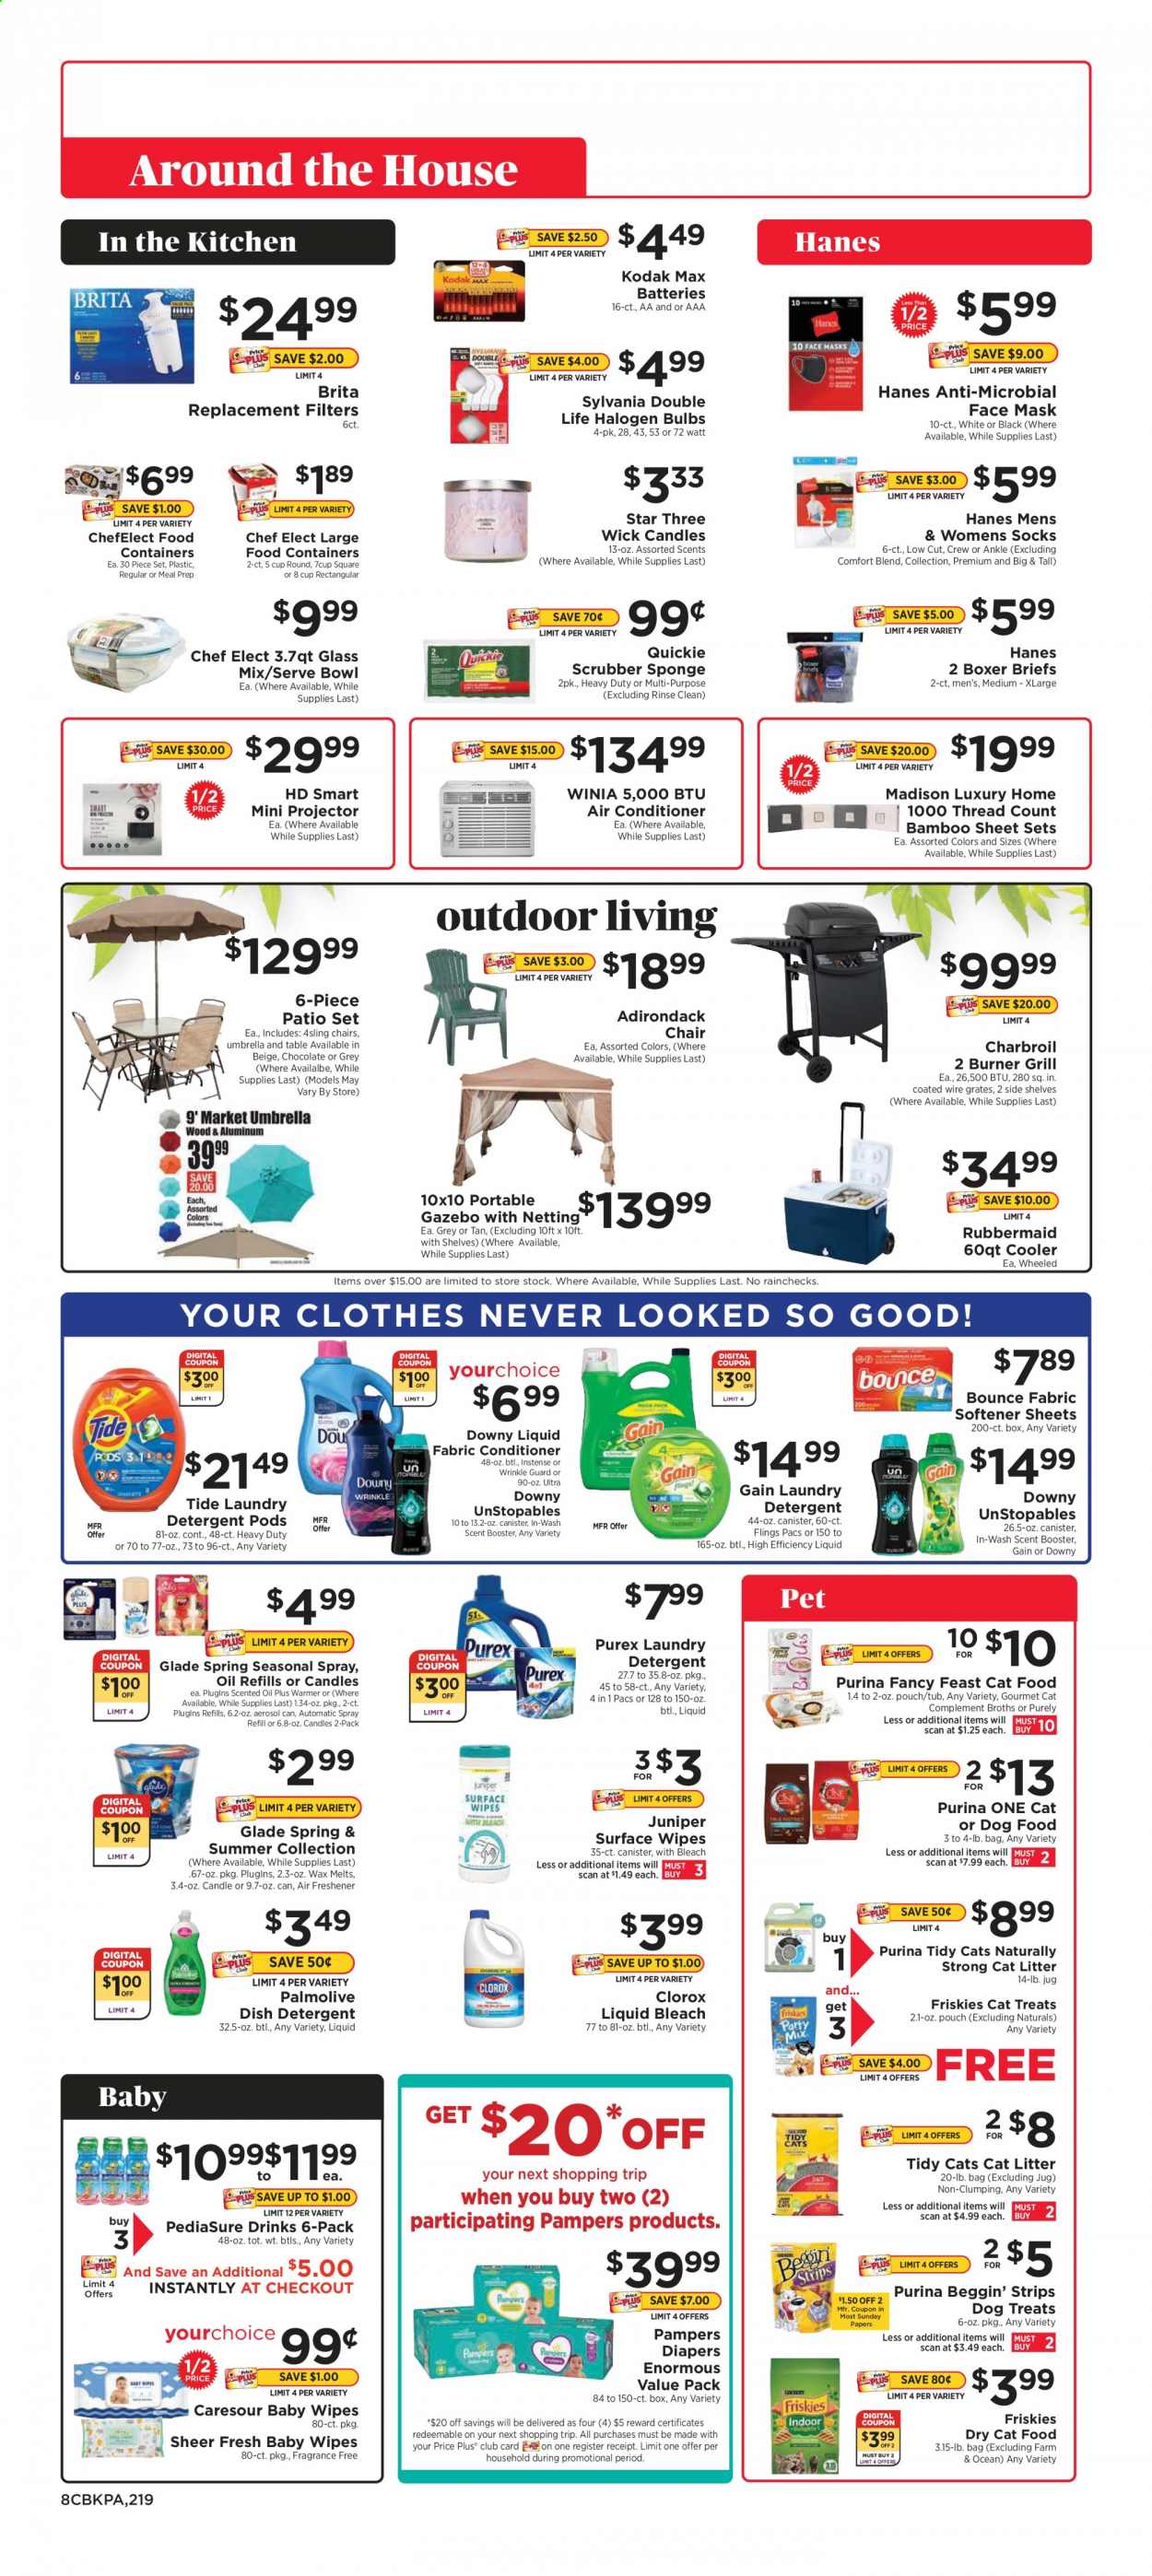 thumbnail - ShopRite Flyer - 05/02/2021 - 05/08/2021 - Sales products - strips, chocolate, oil, wipes, Pampers, baby wipes, nappies, detergent, Gain, bleach, Clorox, Tide, Unstopables, fabric softener, laundry detergent, Bounce, Purex, Downy Laundry, Palmolive, face mask, conditioner, sponge, cup, bowl, candle, air freshener, Glade, scented oil, bulb, Sylvania, cat litter, animal food, cat food, dog food, Purina, dry cat food, Beggin', Fancy Feast, Friskies, socks. Page 8.